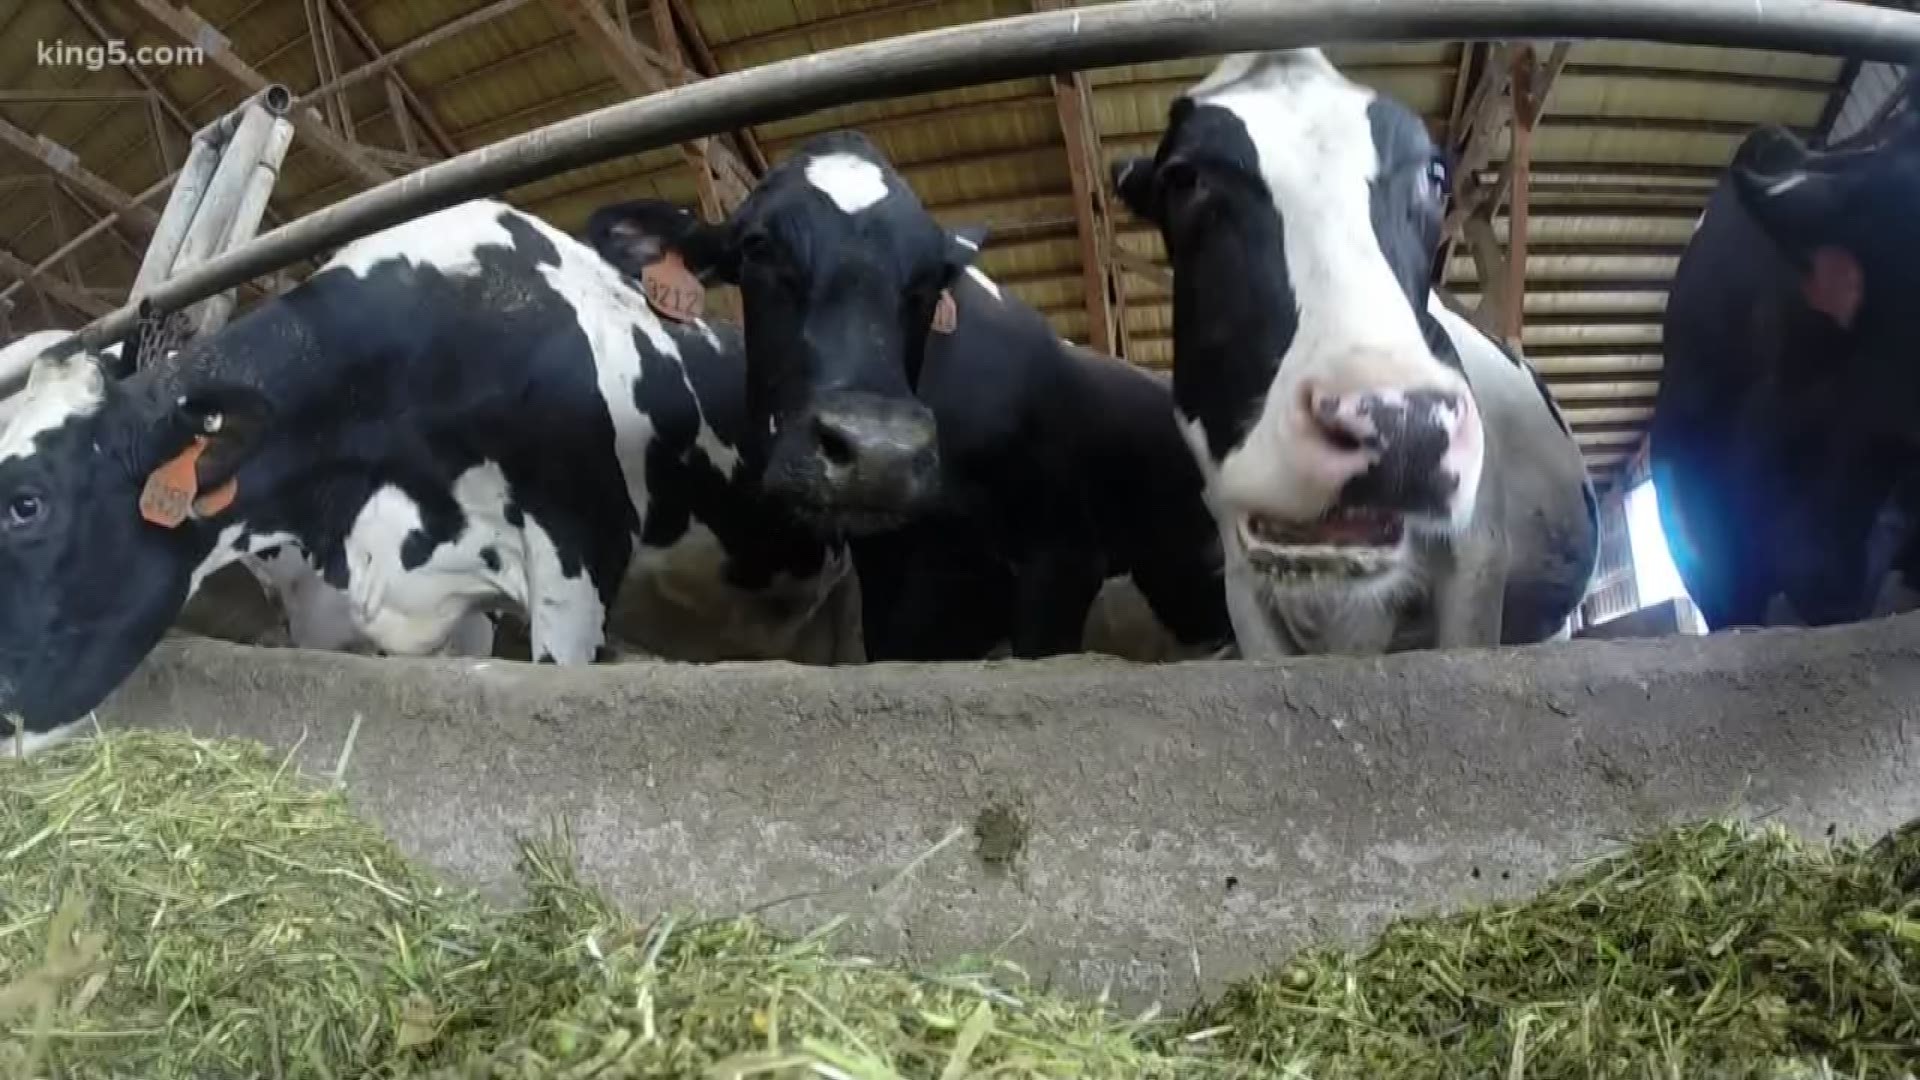 Runoff from farms has been a major source of pollution in our waters over the years, but a new technology could actually help make farms much more fish friendly. It's taking cow poop and converting it to clean water. KING 5's Eric Wilkinson with the manure maneuver.